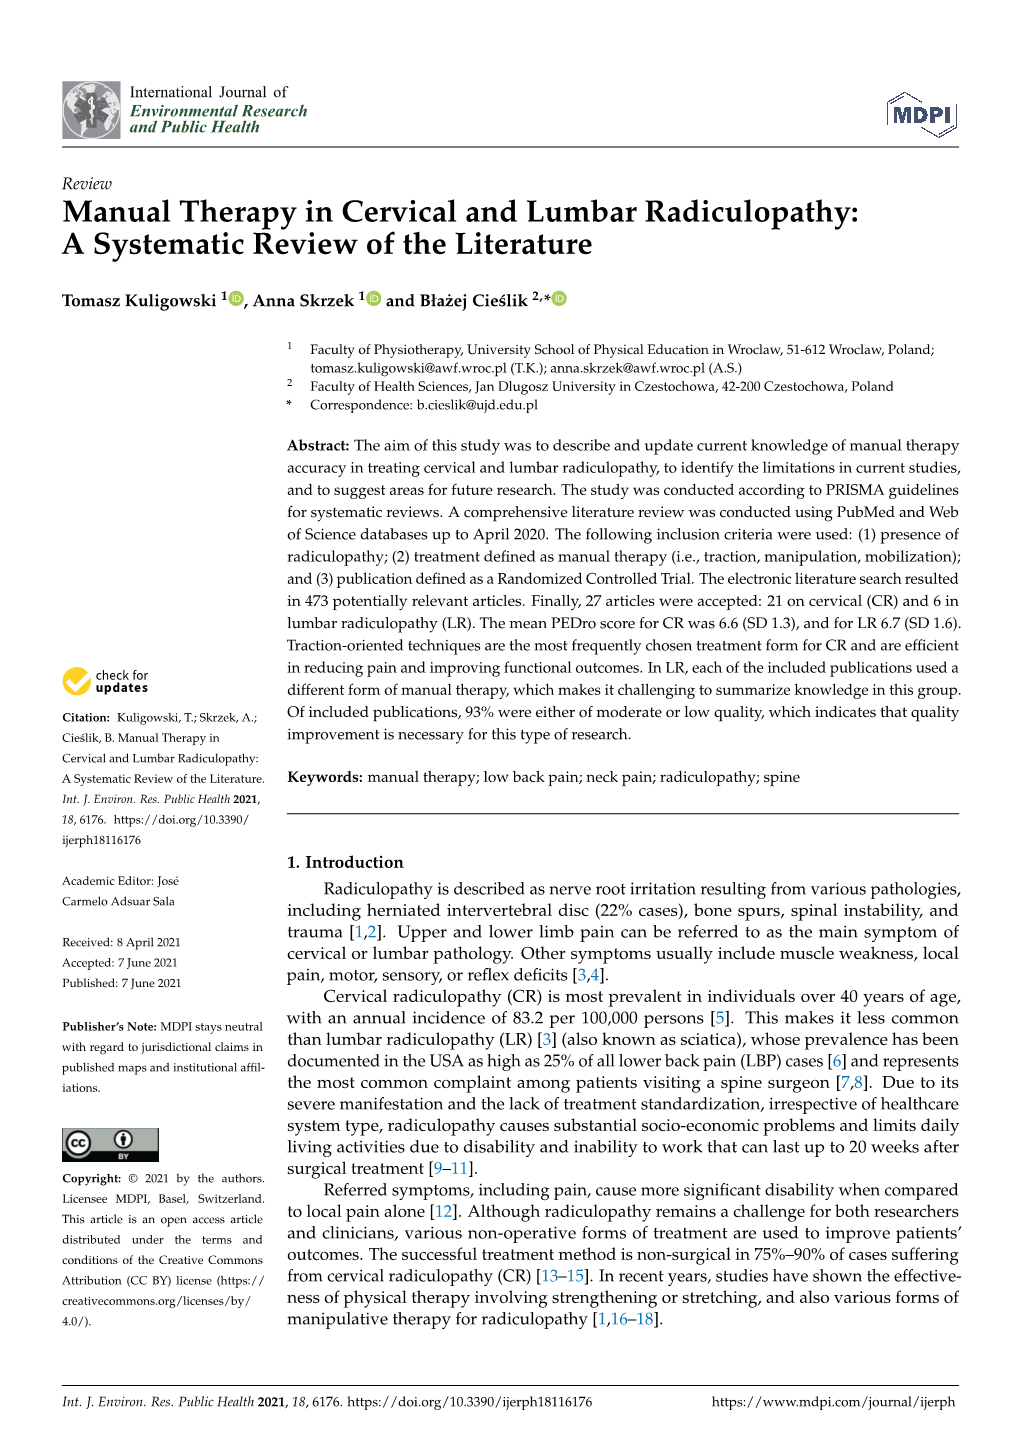 Manual Therapy in Cervical and Lumbar Radiculopathy: a Systematic Review of the Literature